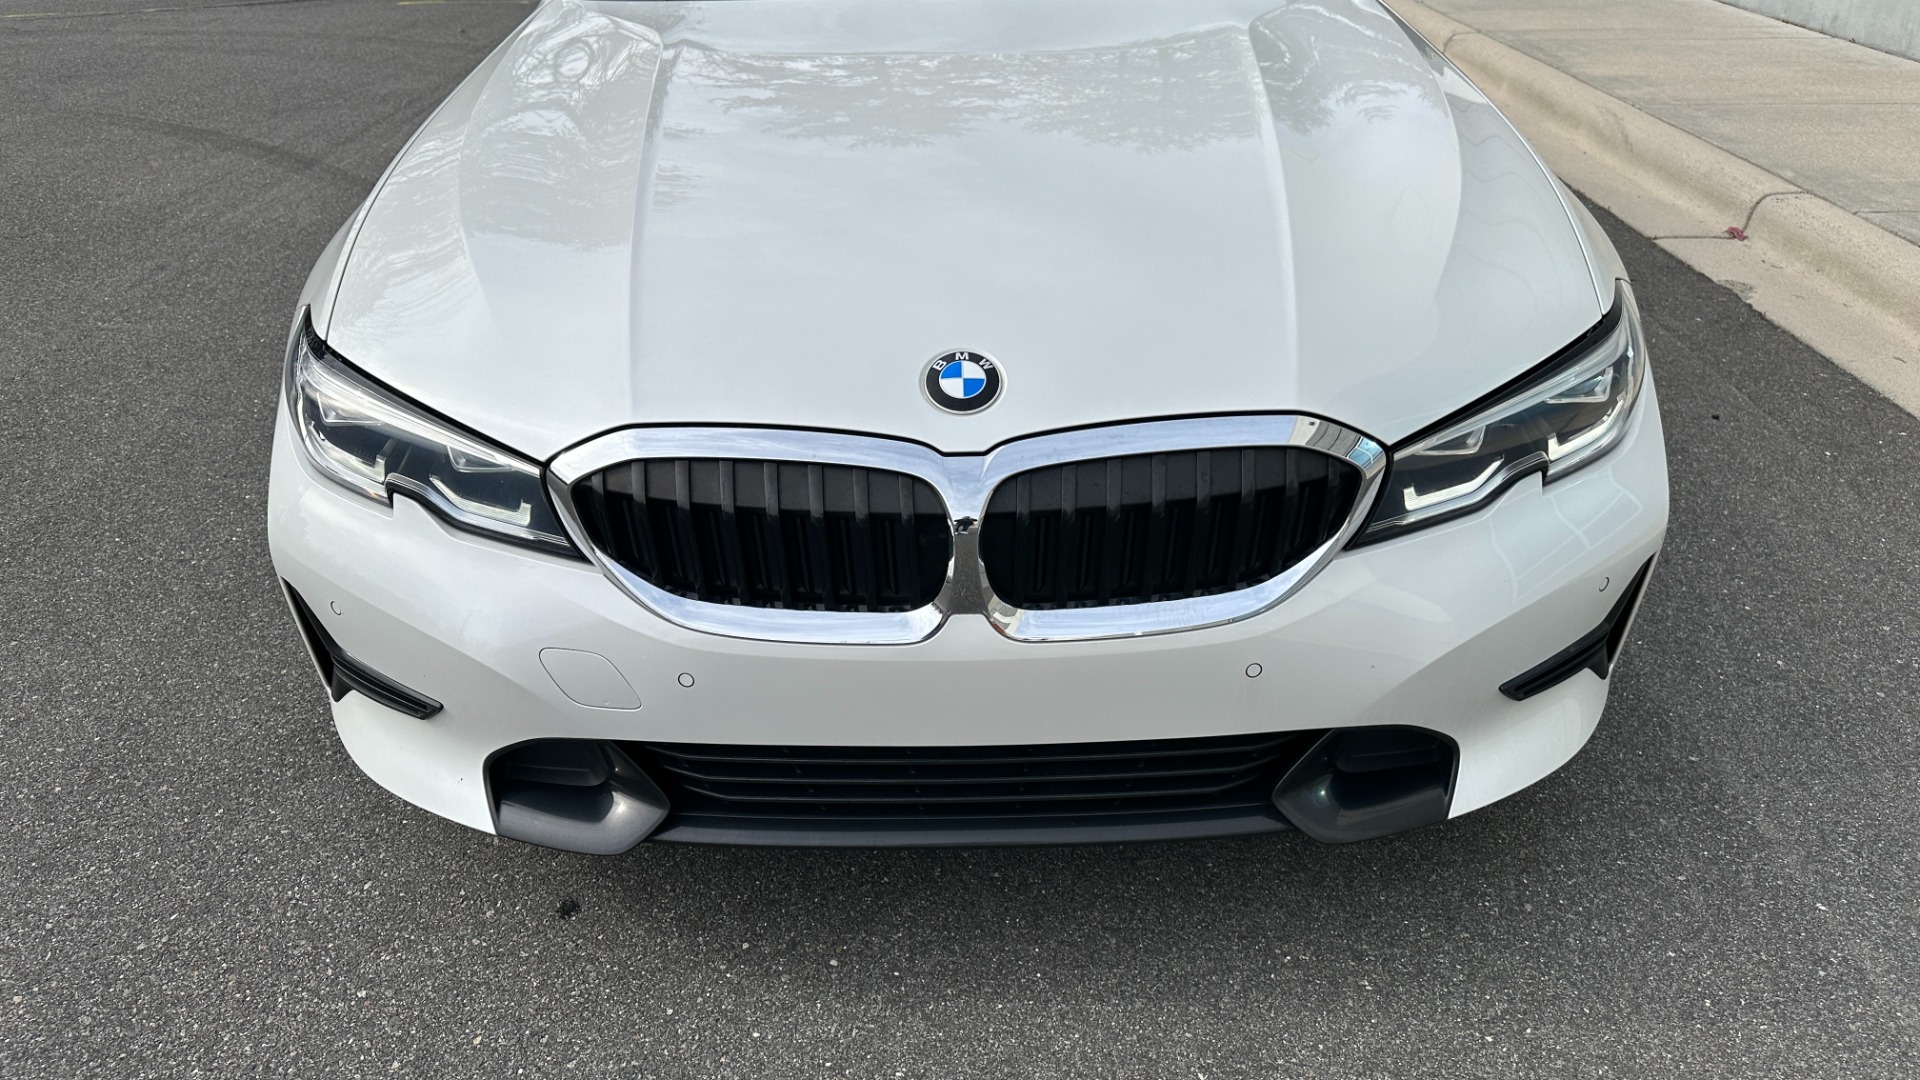 Used 2020 BMW 3 Series 330i xDrive / CONVENIENCE PKG / HEATED STEERING / HEATED SEATS / AWD / SUNR for sale Sold at Formula Imports in Charlotte NC 28227 8